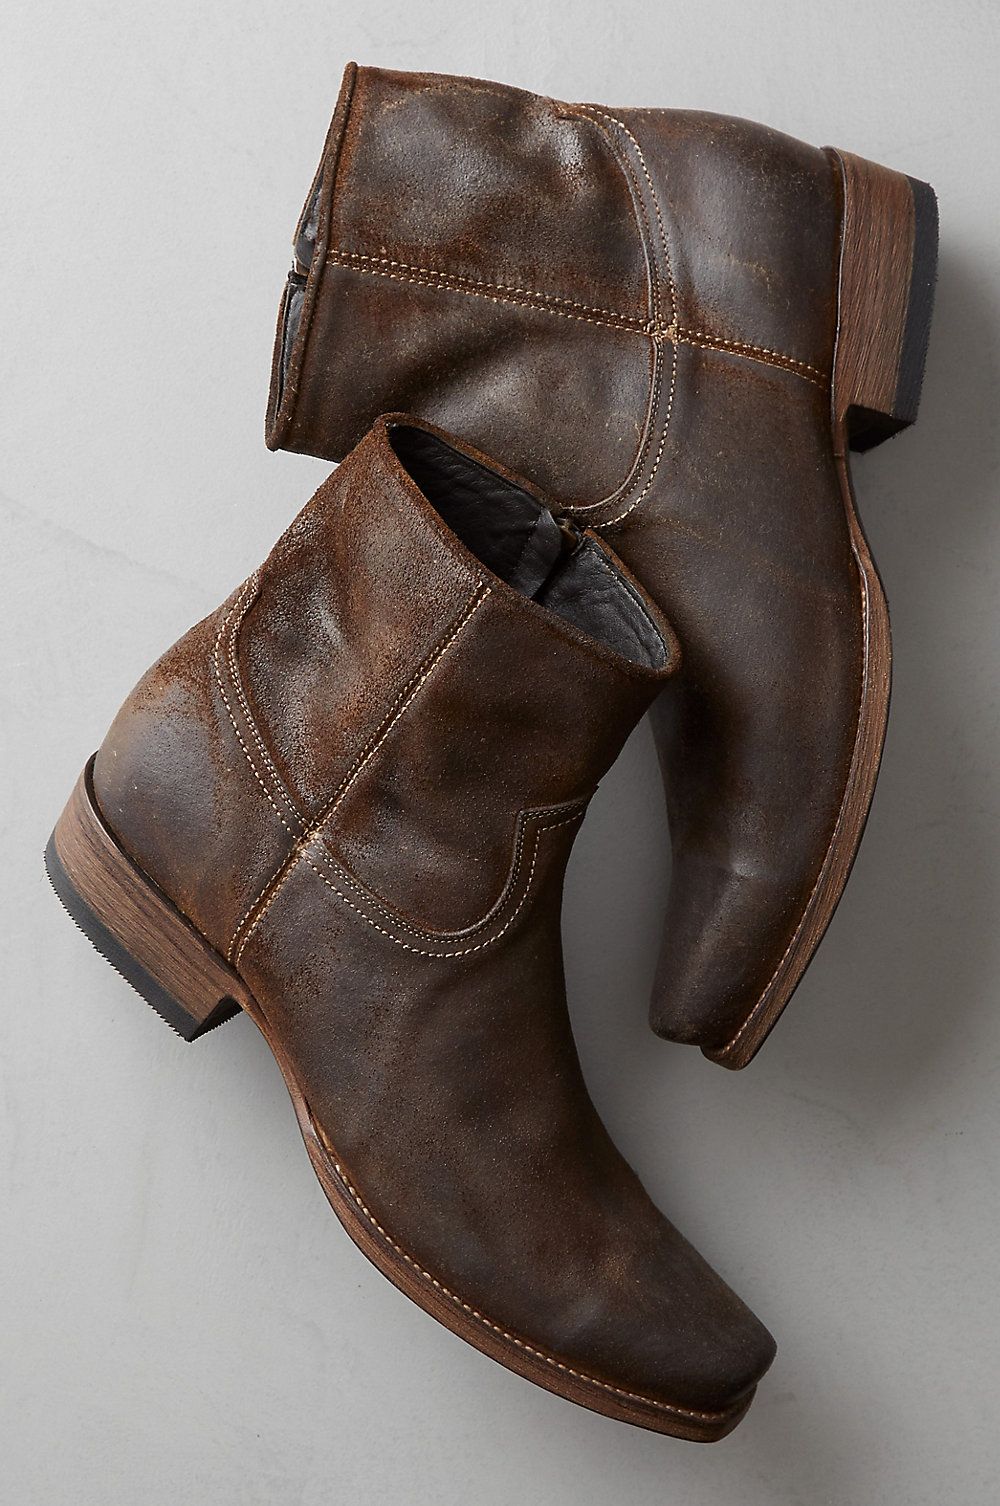 Look stylish with best pair of mens
cowboy boots